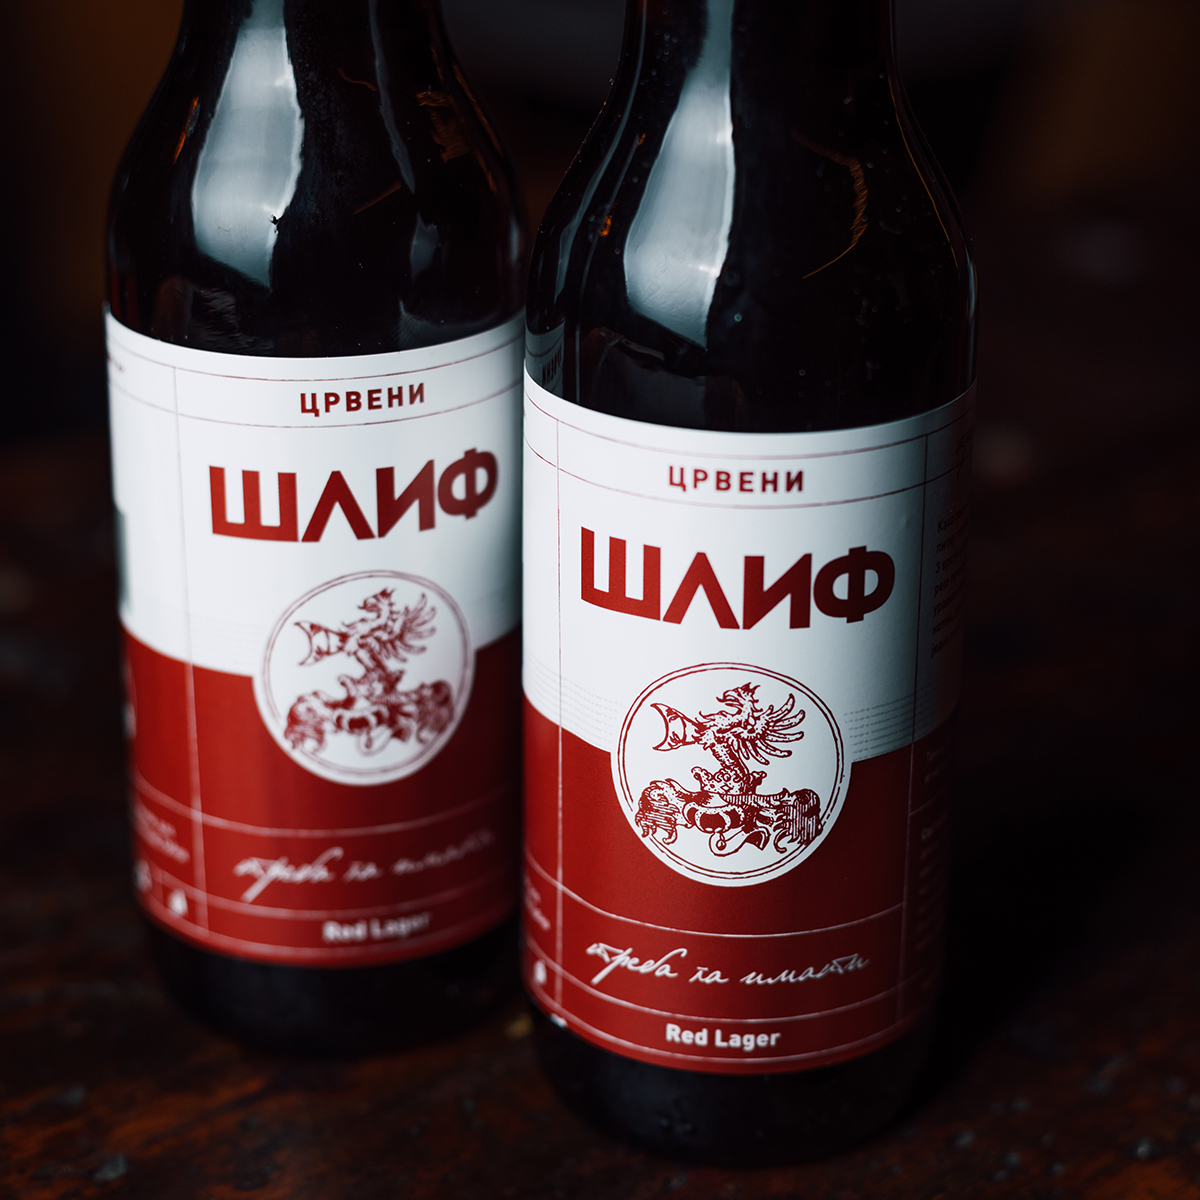 New Identity and Packaging for Small Craft Beer Producer